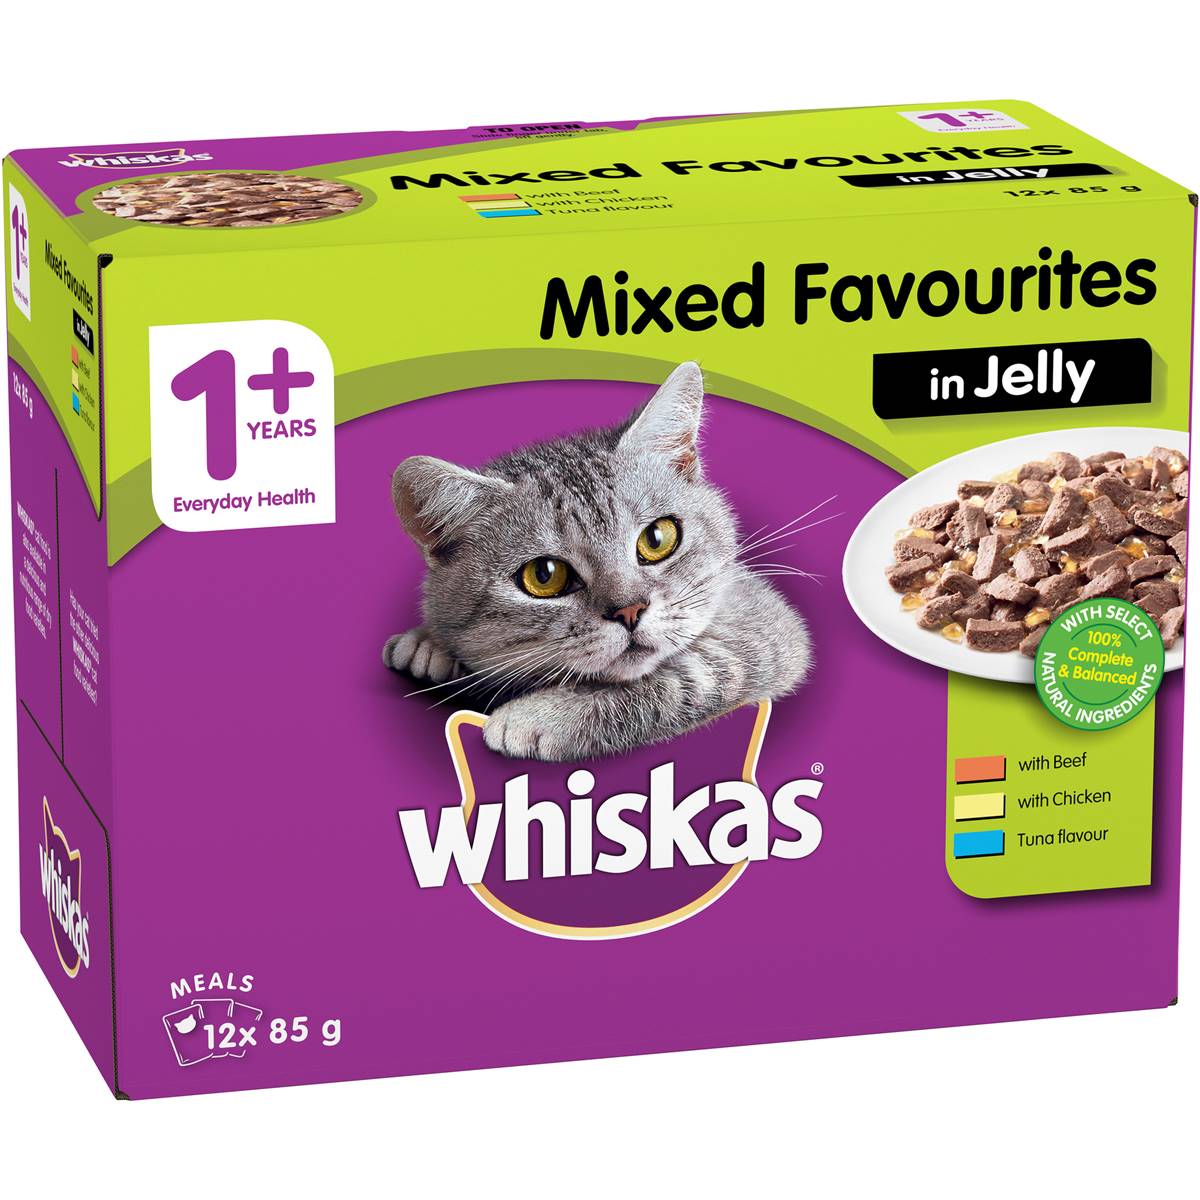 Whiskas 1+ Years Mixed Favourites In Jelly Wet Cat Food Pouch 12x85g